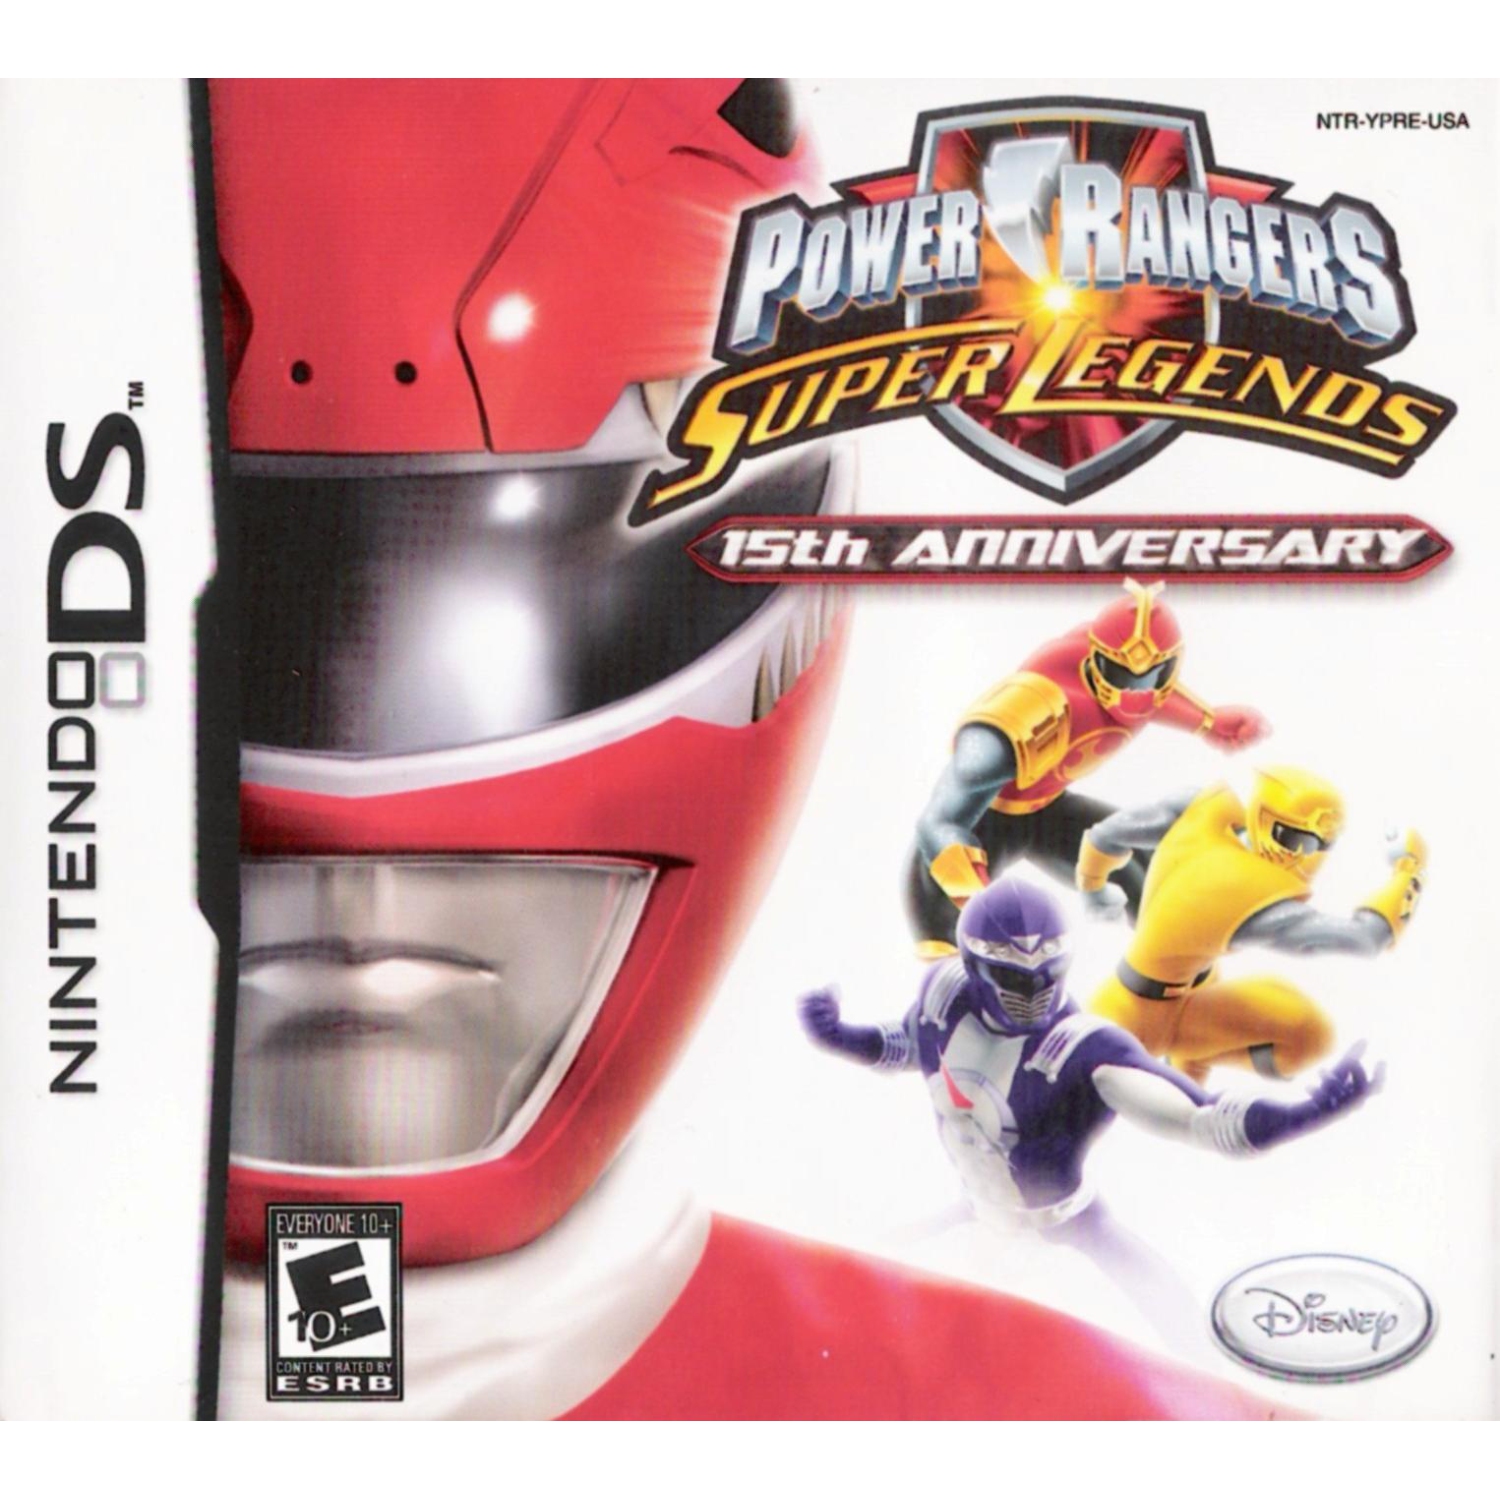 Previously Played - Power Rangers Super Legends for Nintendo DS